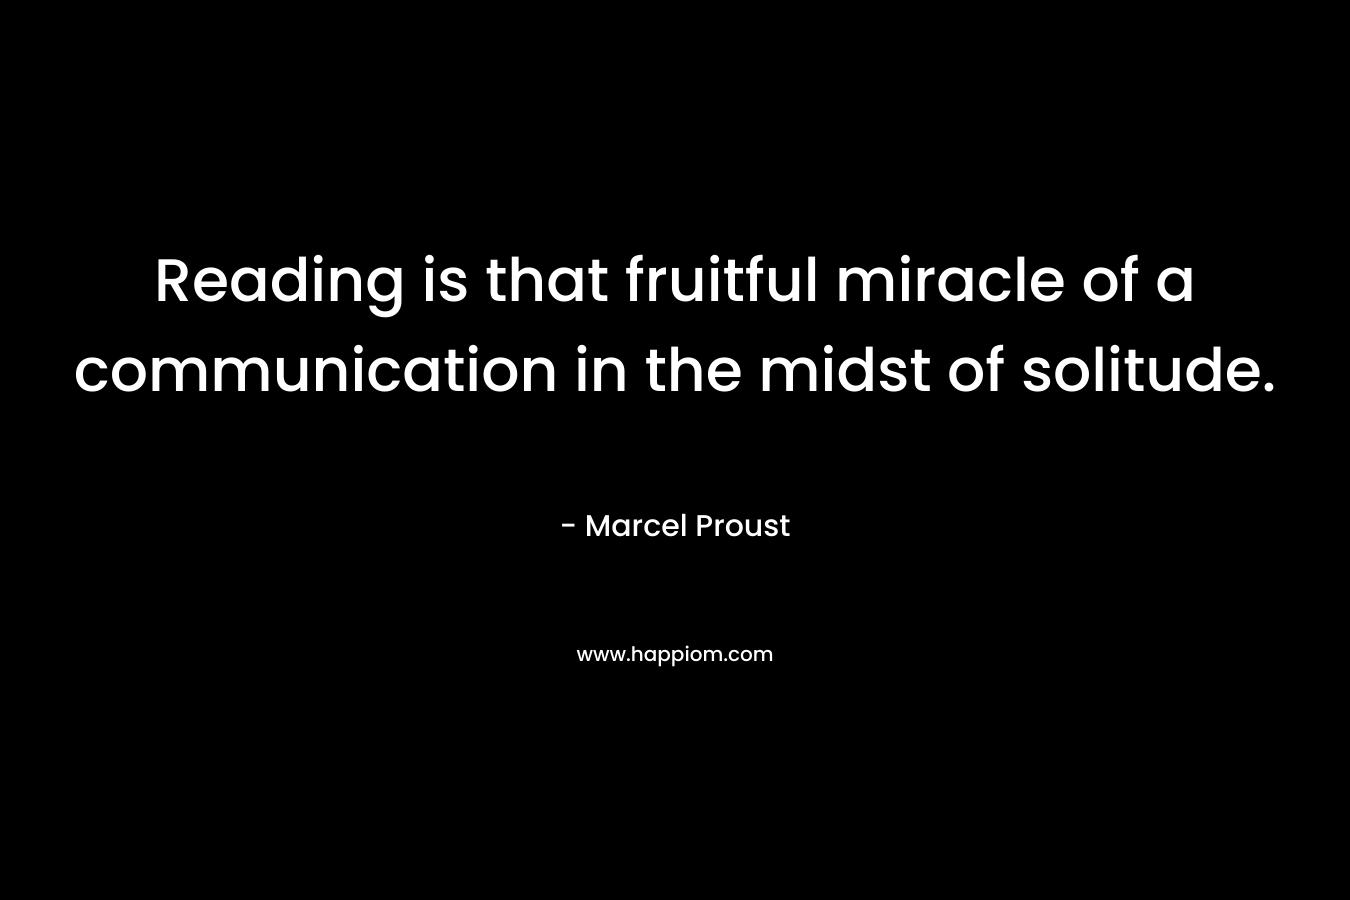 Reading is that fruitful miracle of a communication in the midst of solitude.